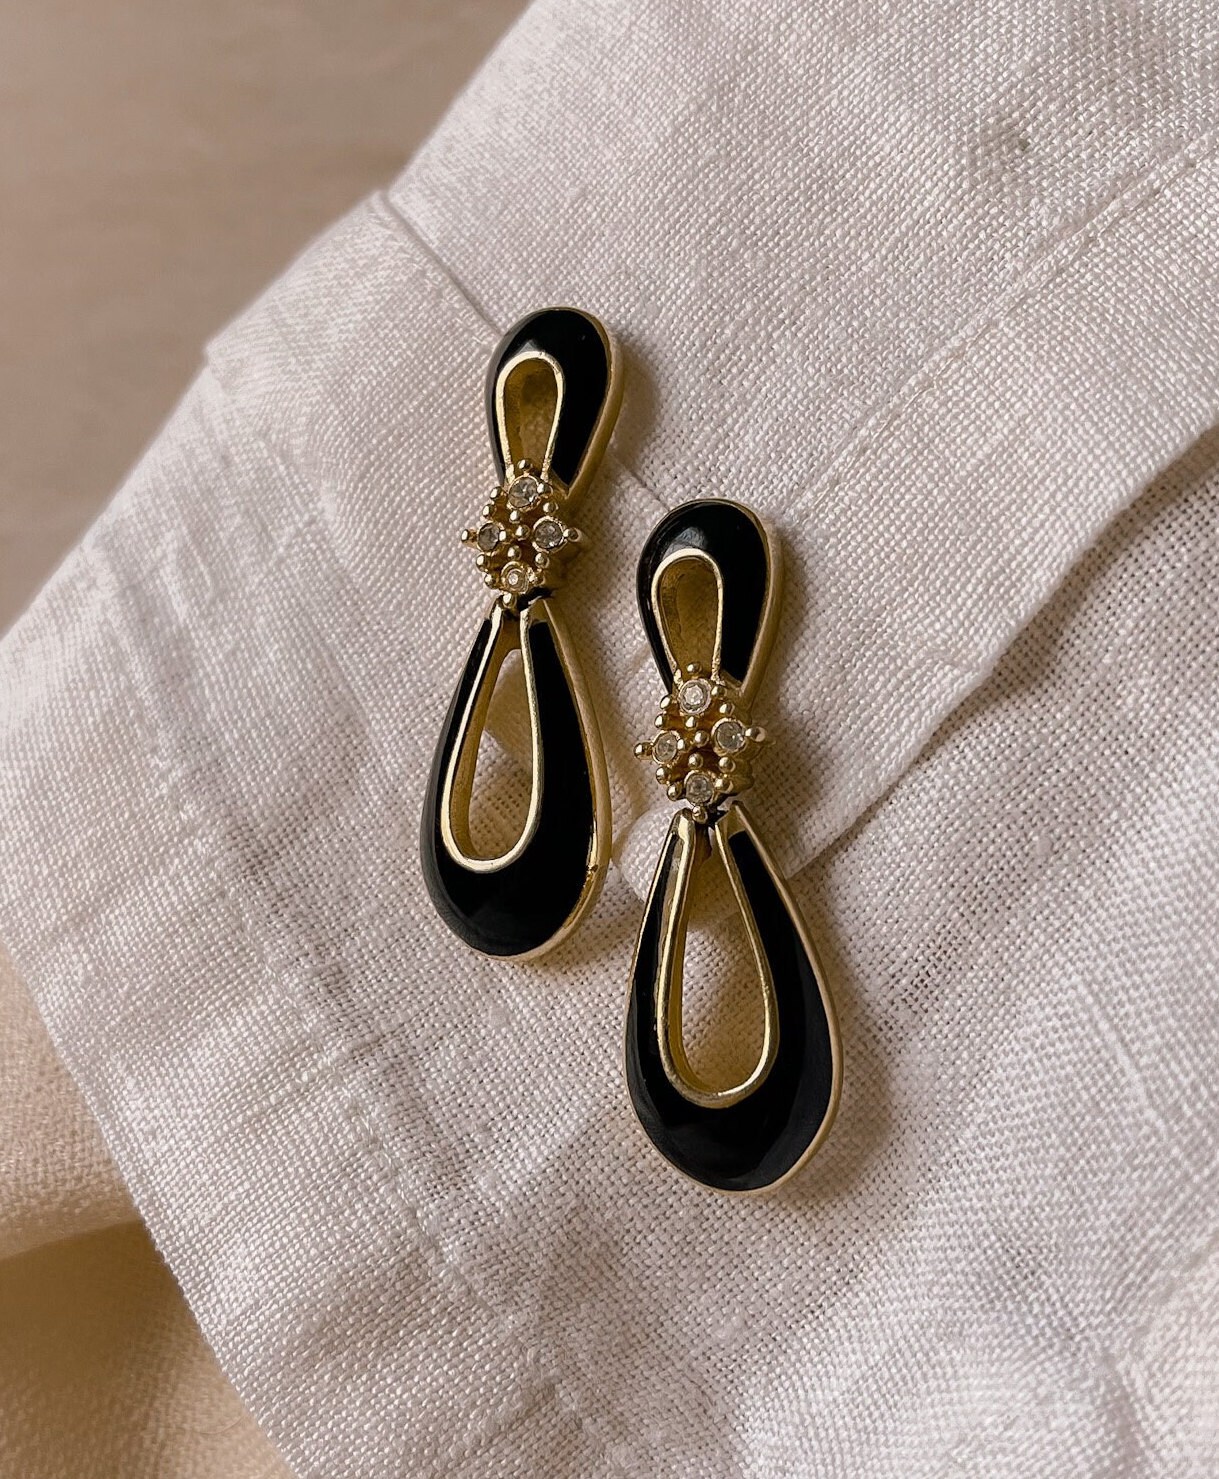 Dior Earrings for women  Buy or Sell your Designer Jewelry online   Vestiaire Collective